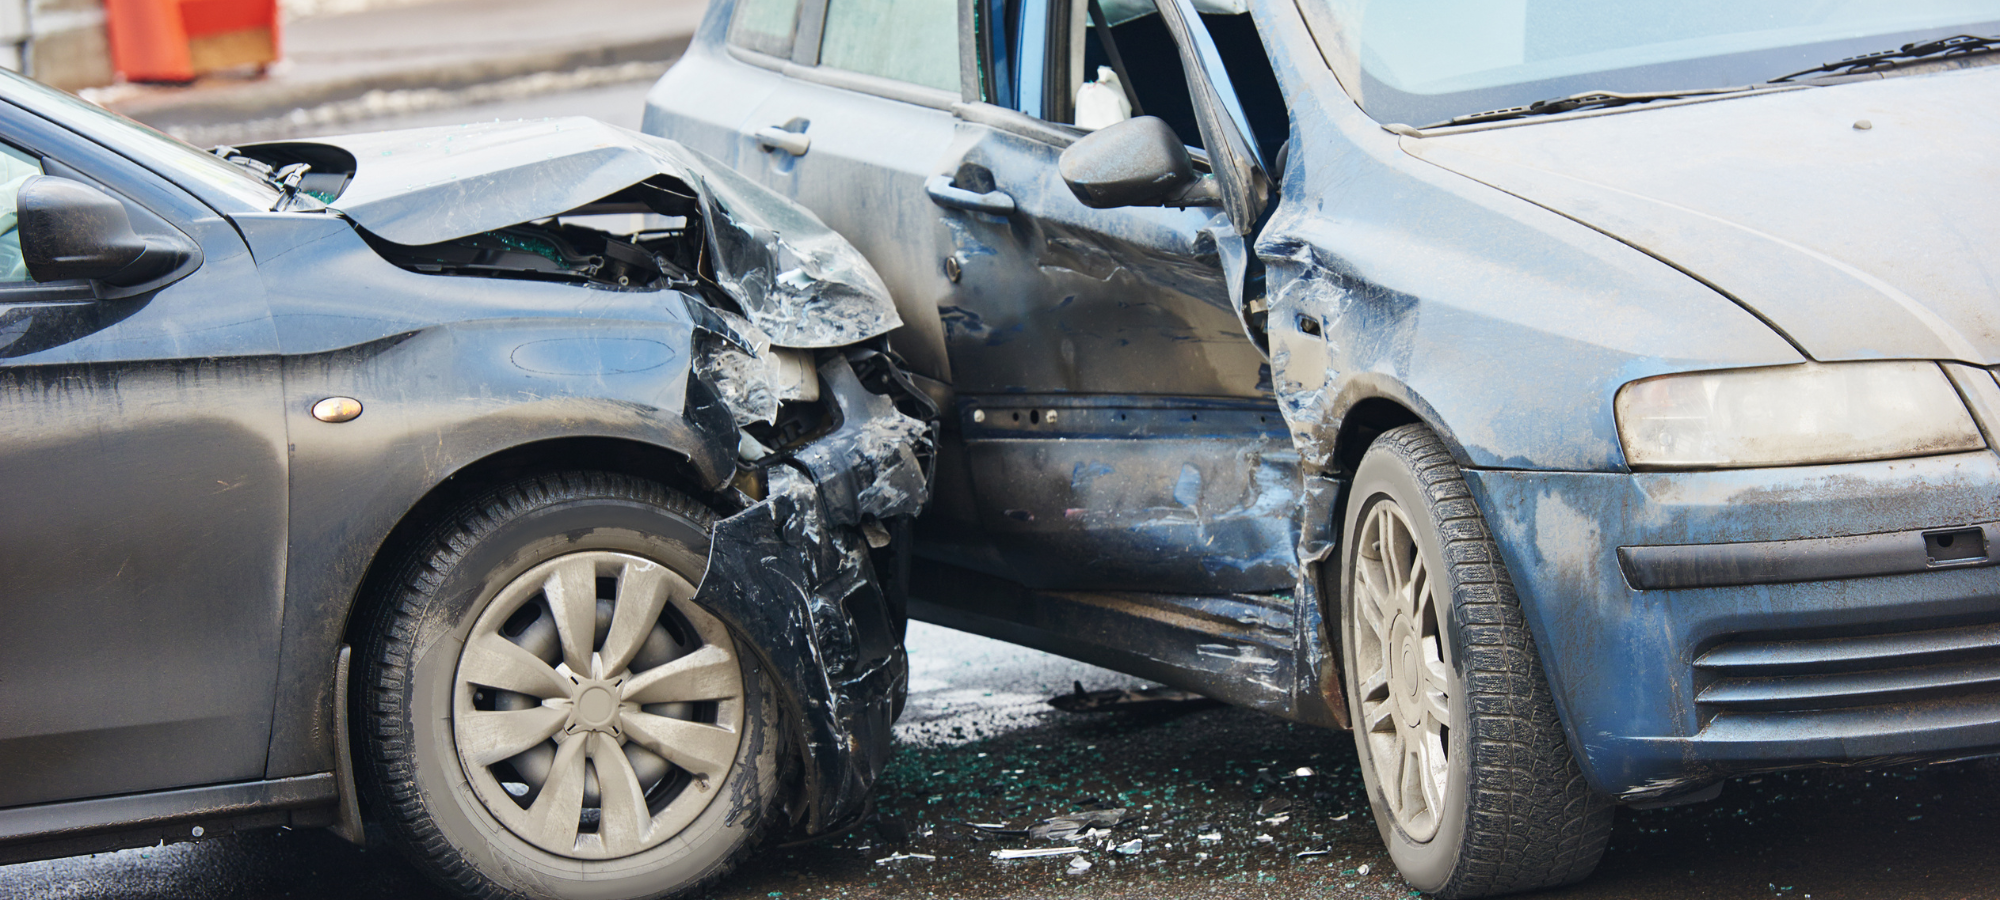 Summer auto accident prevention: tips and resources to share with your clients now